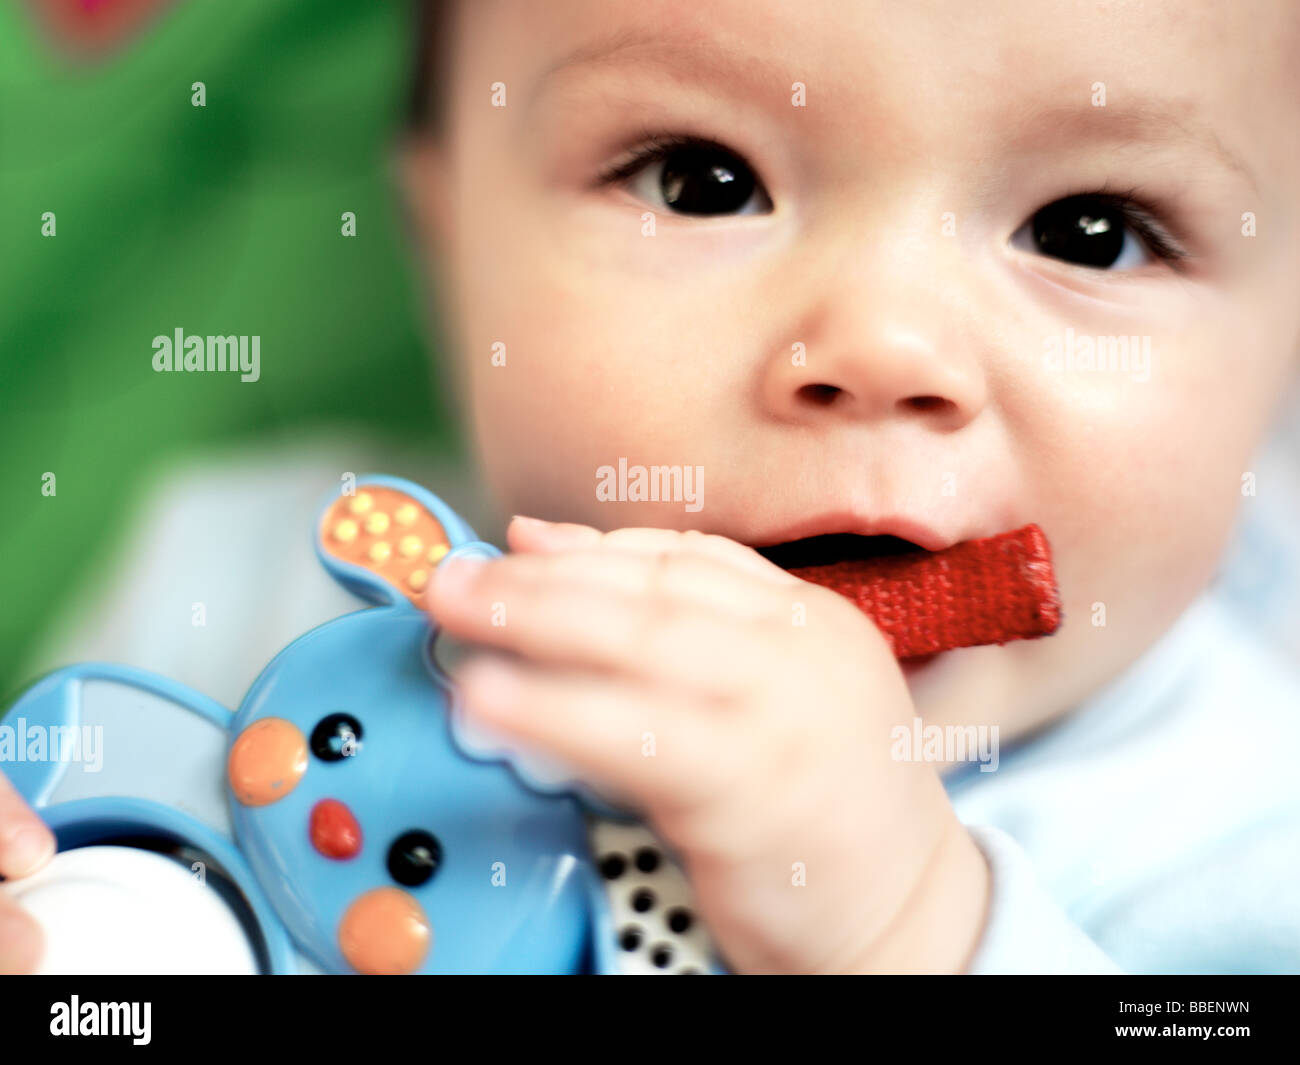 Seven month old baby boy chewing toy Stock Photo